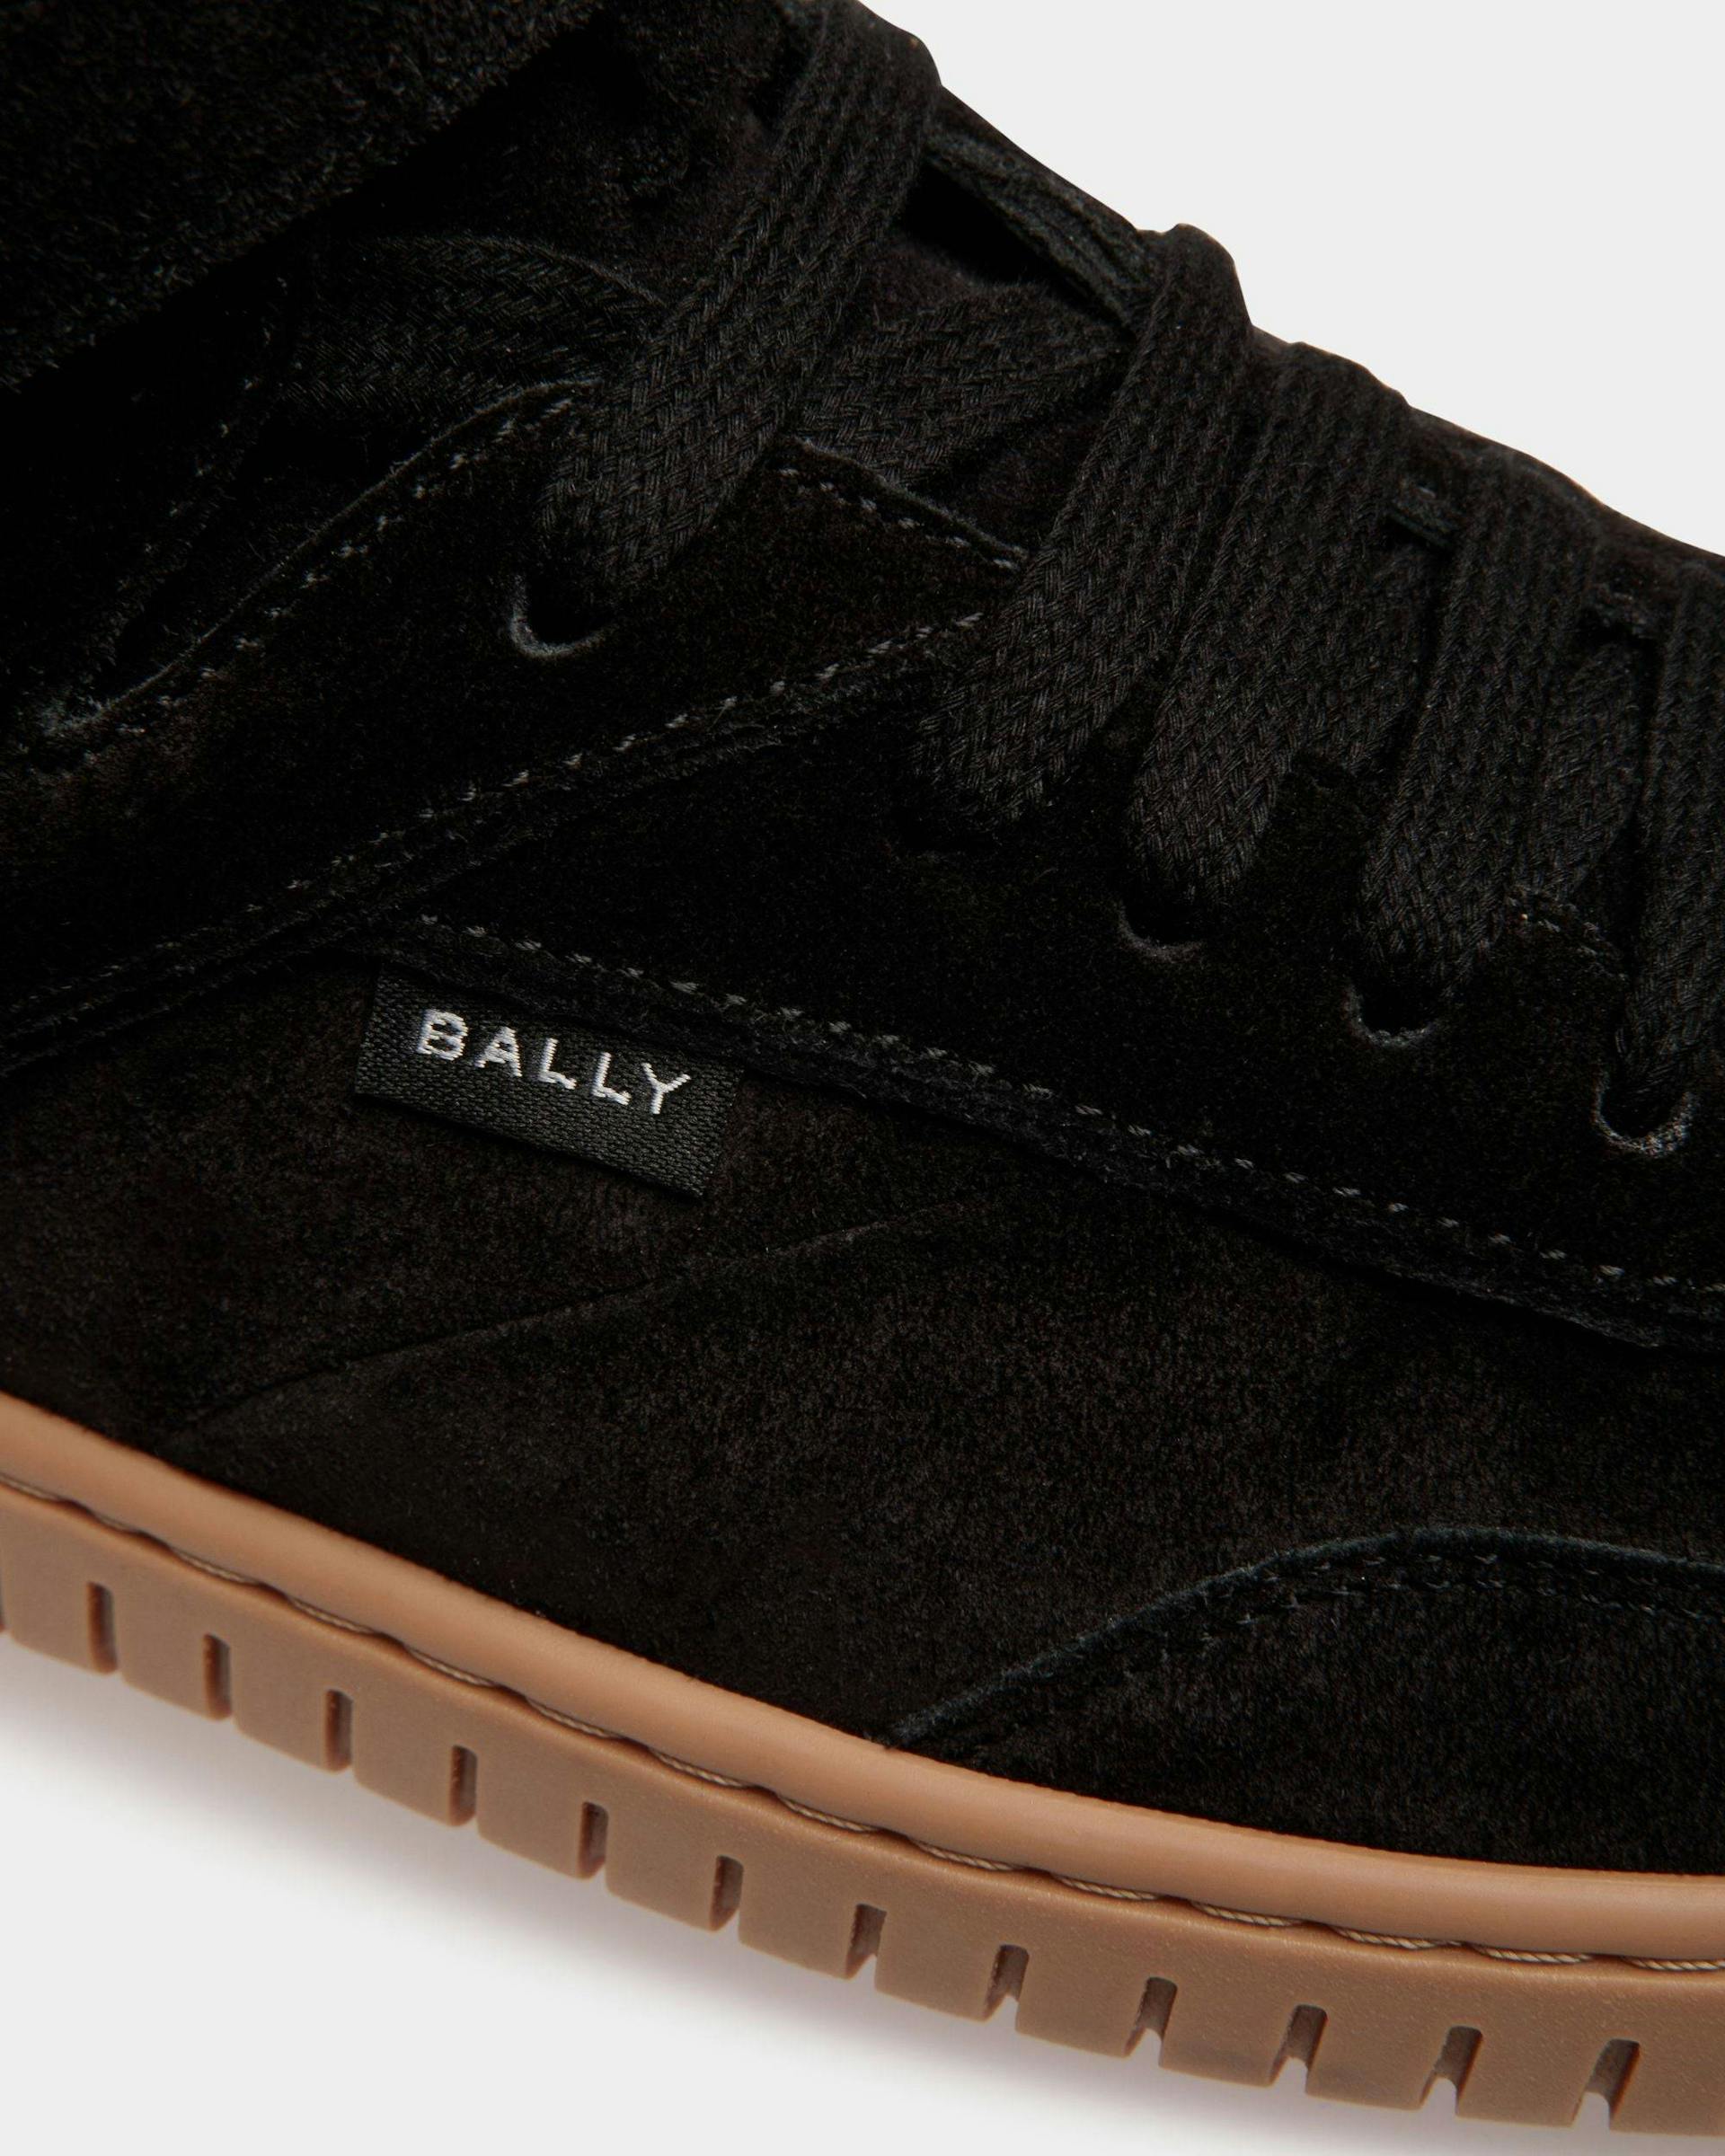 Player Sneakers In Black And Amber Leather - Women's - Bally - 06